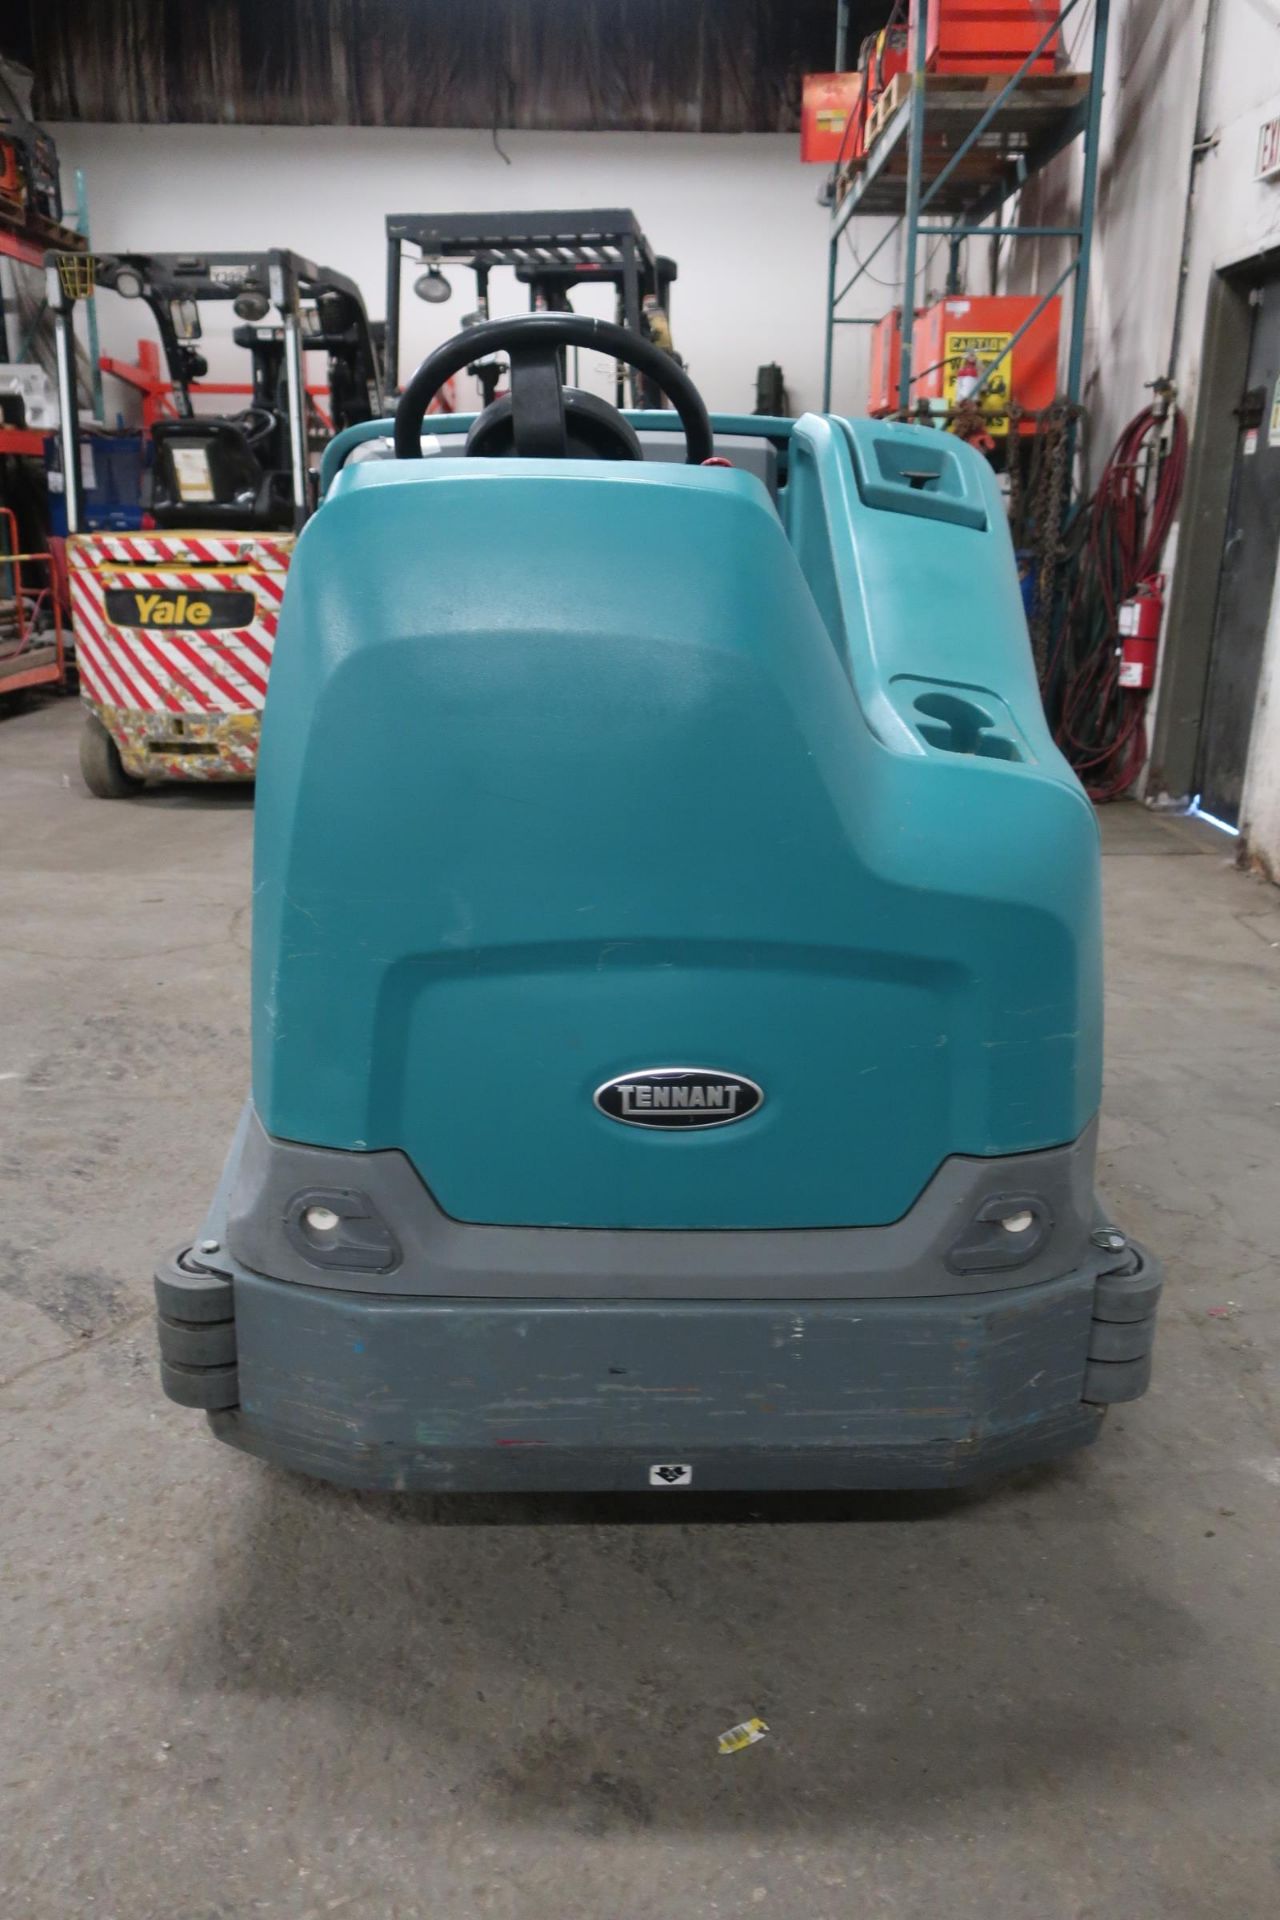 MINT 2015 Tennant T17 ECH20 Ride On Power Scrubber Sweeper Power-Operated Cleaning Machine - - Image 2 of 4